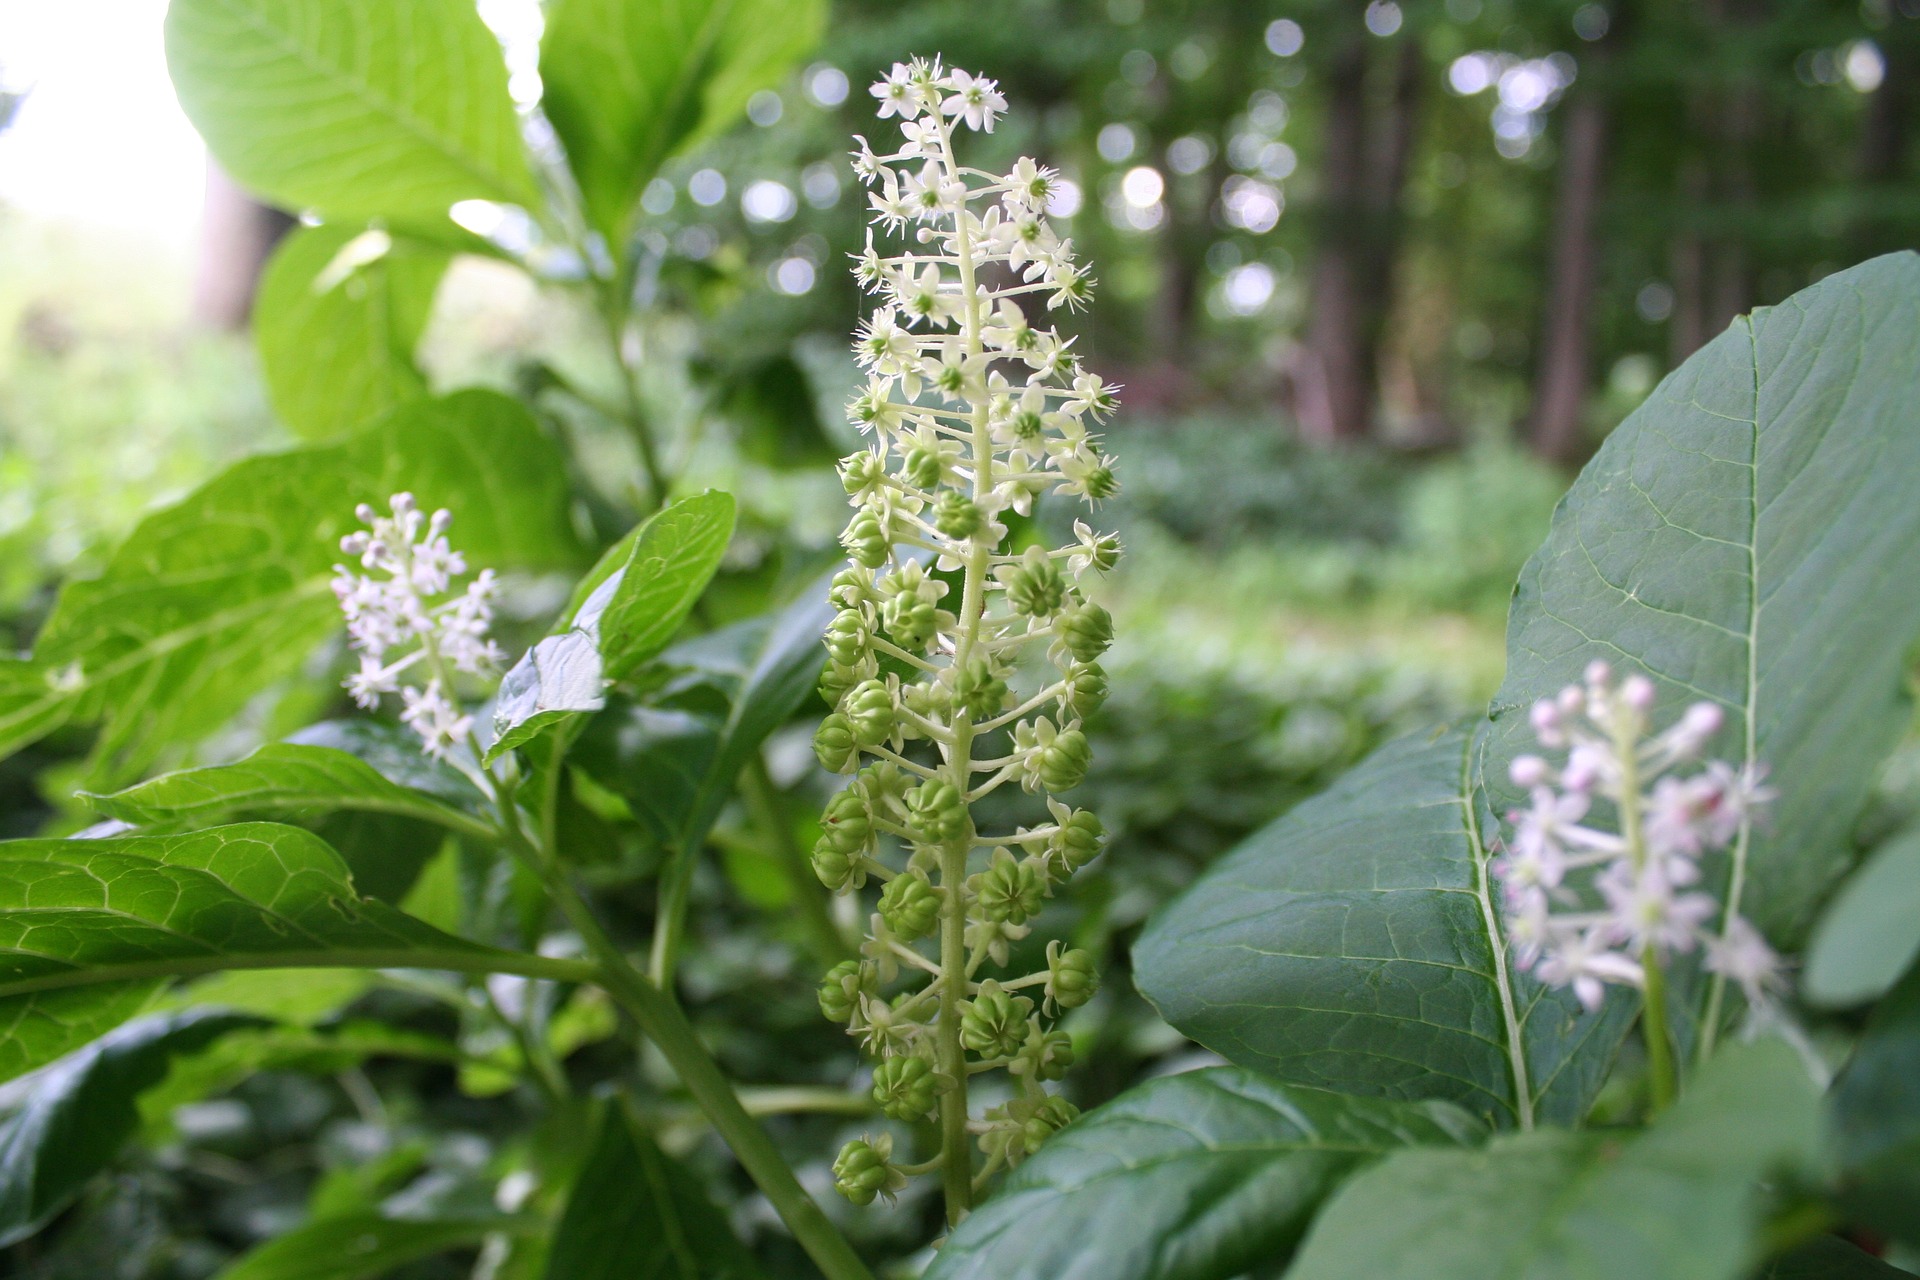 Pokeweed plant up close with white/green flowers